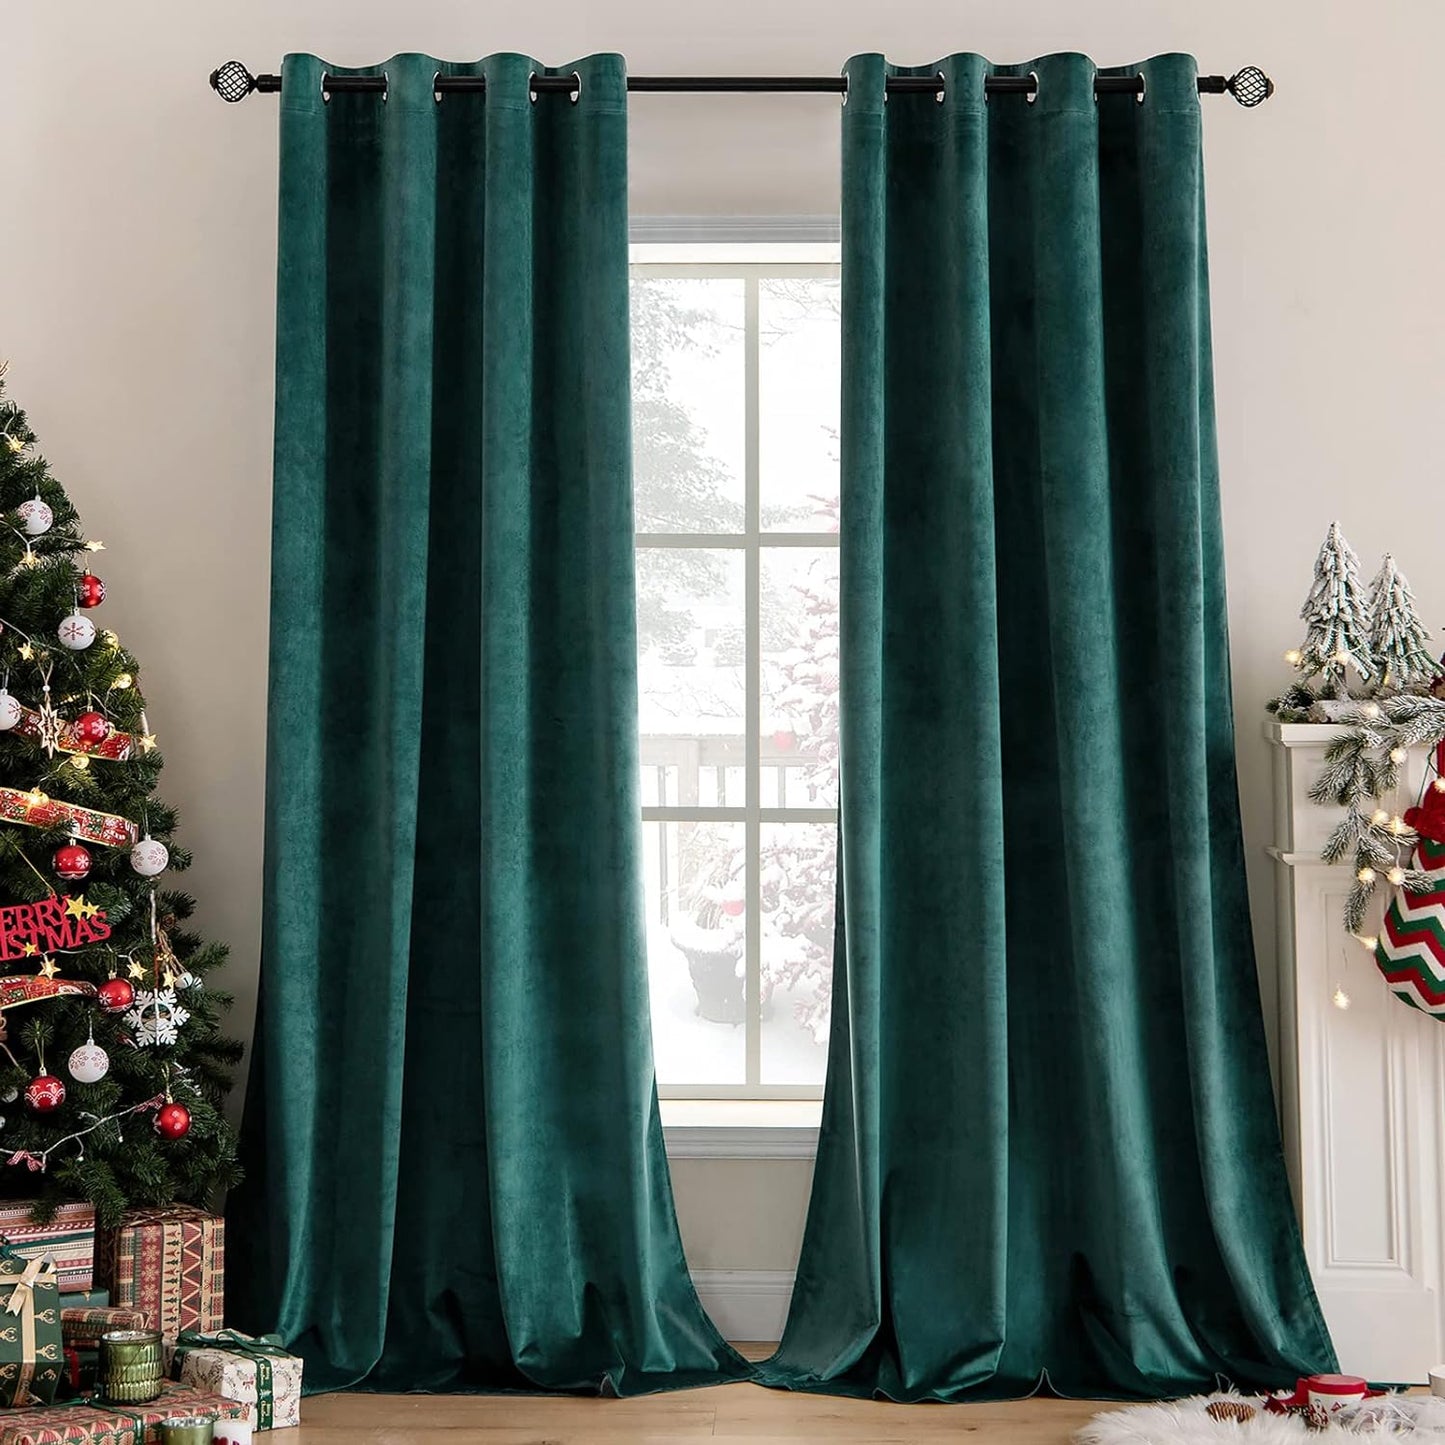 MIULEE Velvet Curtains Olive Green Elegant Grommet Curtains Thermal Insulated Soundproof Room Darkening Curtains/Drapes for Classical Living Room Bedroom Decor 52 X 84 Inch Set of 2  MIULEE Dark Green W52 X L96 